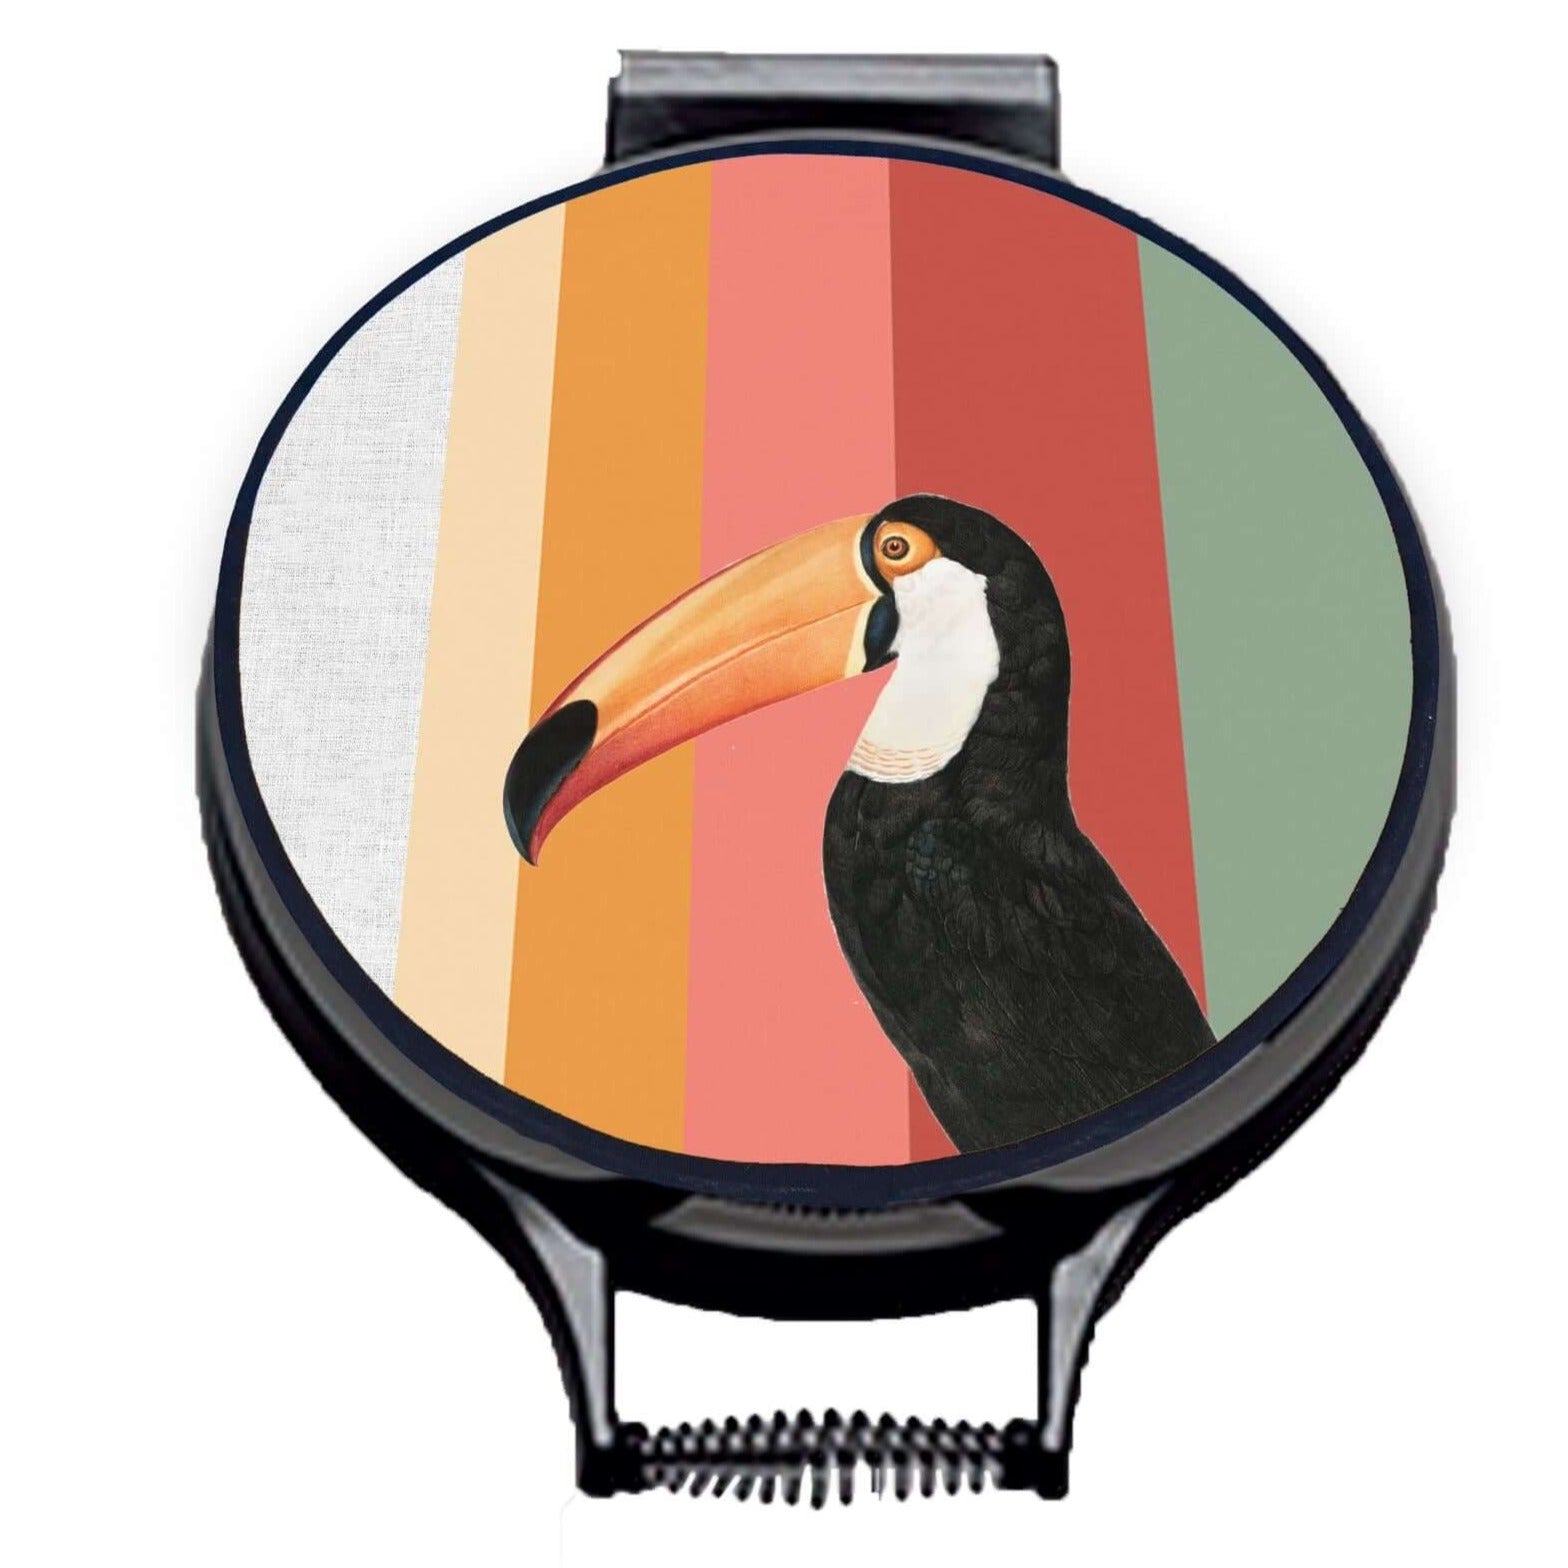 Toco Toucan illustration print with stripes of green, red, pink and orange on beige linen circular hob cover with black hemming. Chefs hob cover. Pictured on metal cooker lid on an isolated background. Mustard and Gray